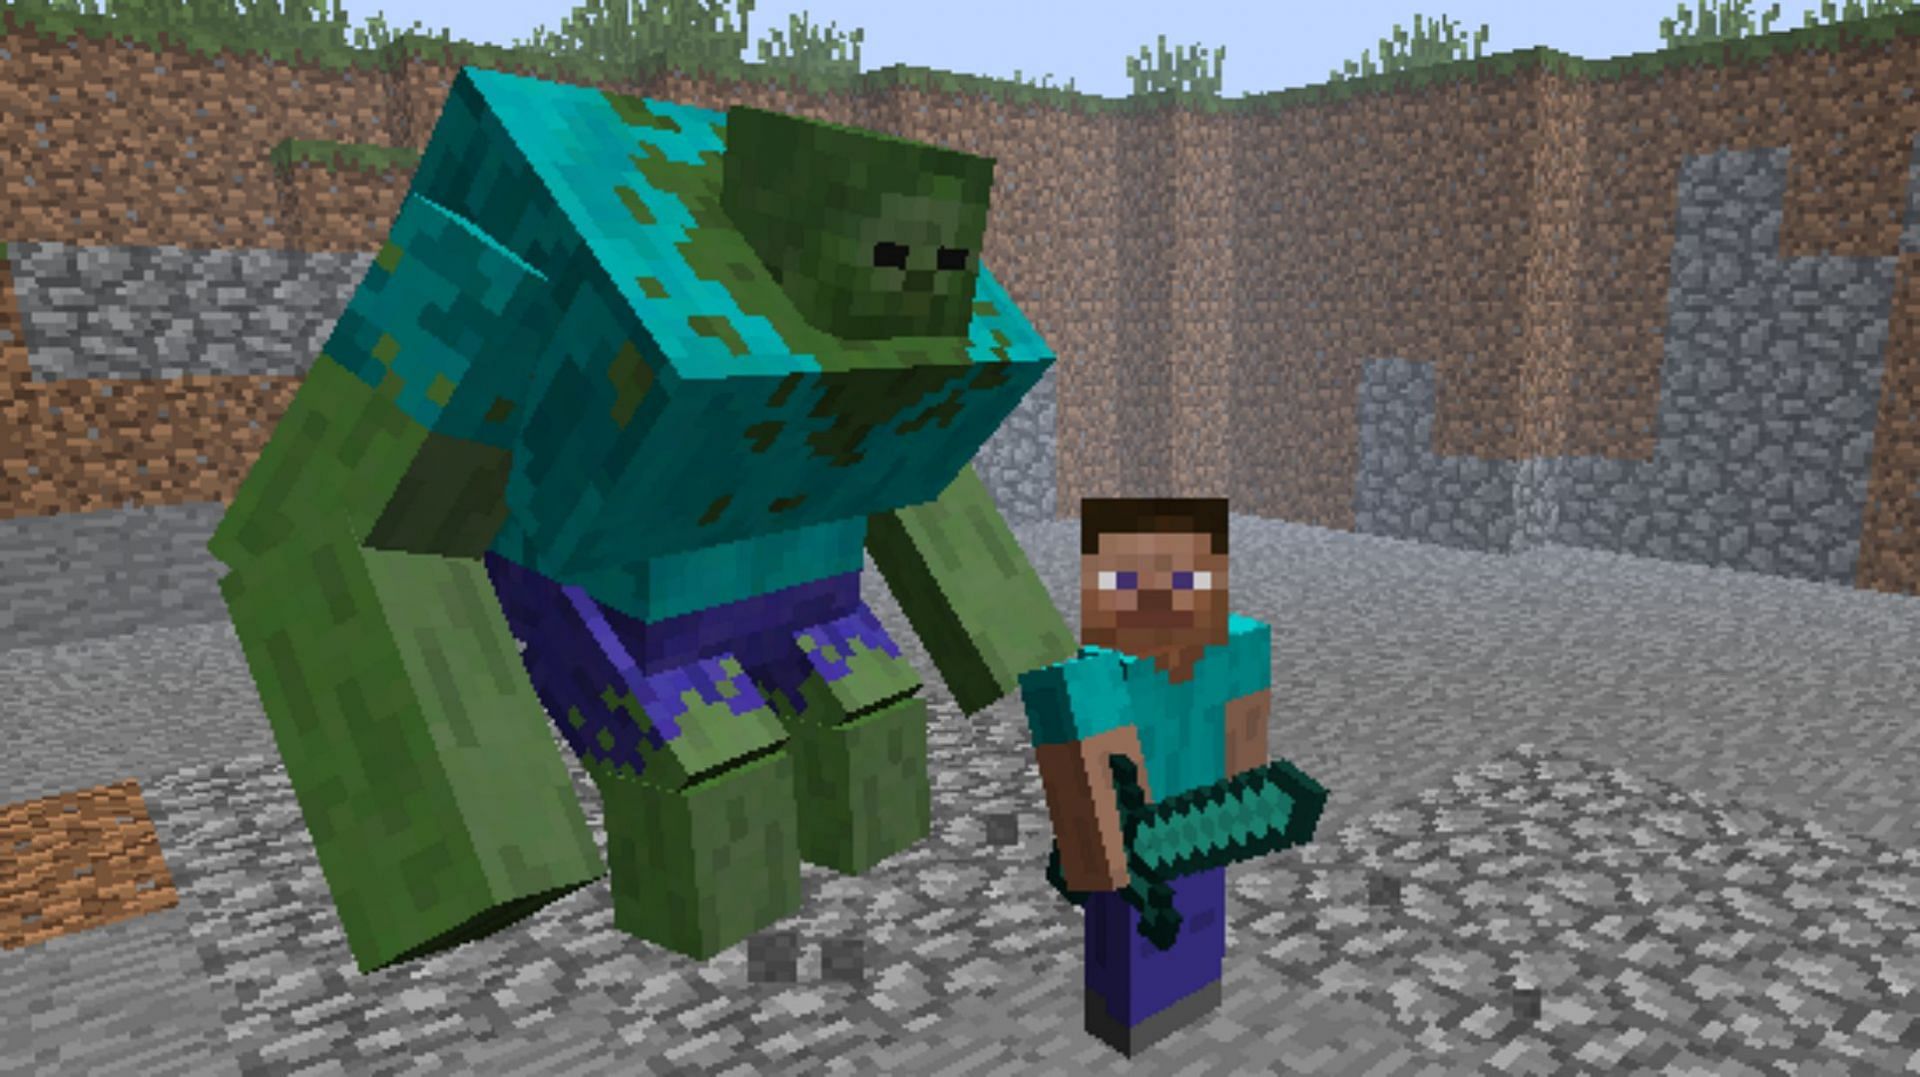 Mutant Zombies are rare mobs that can spawn anywhere at night (Image via CurseForge)